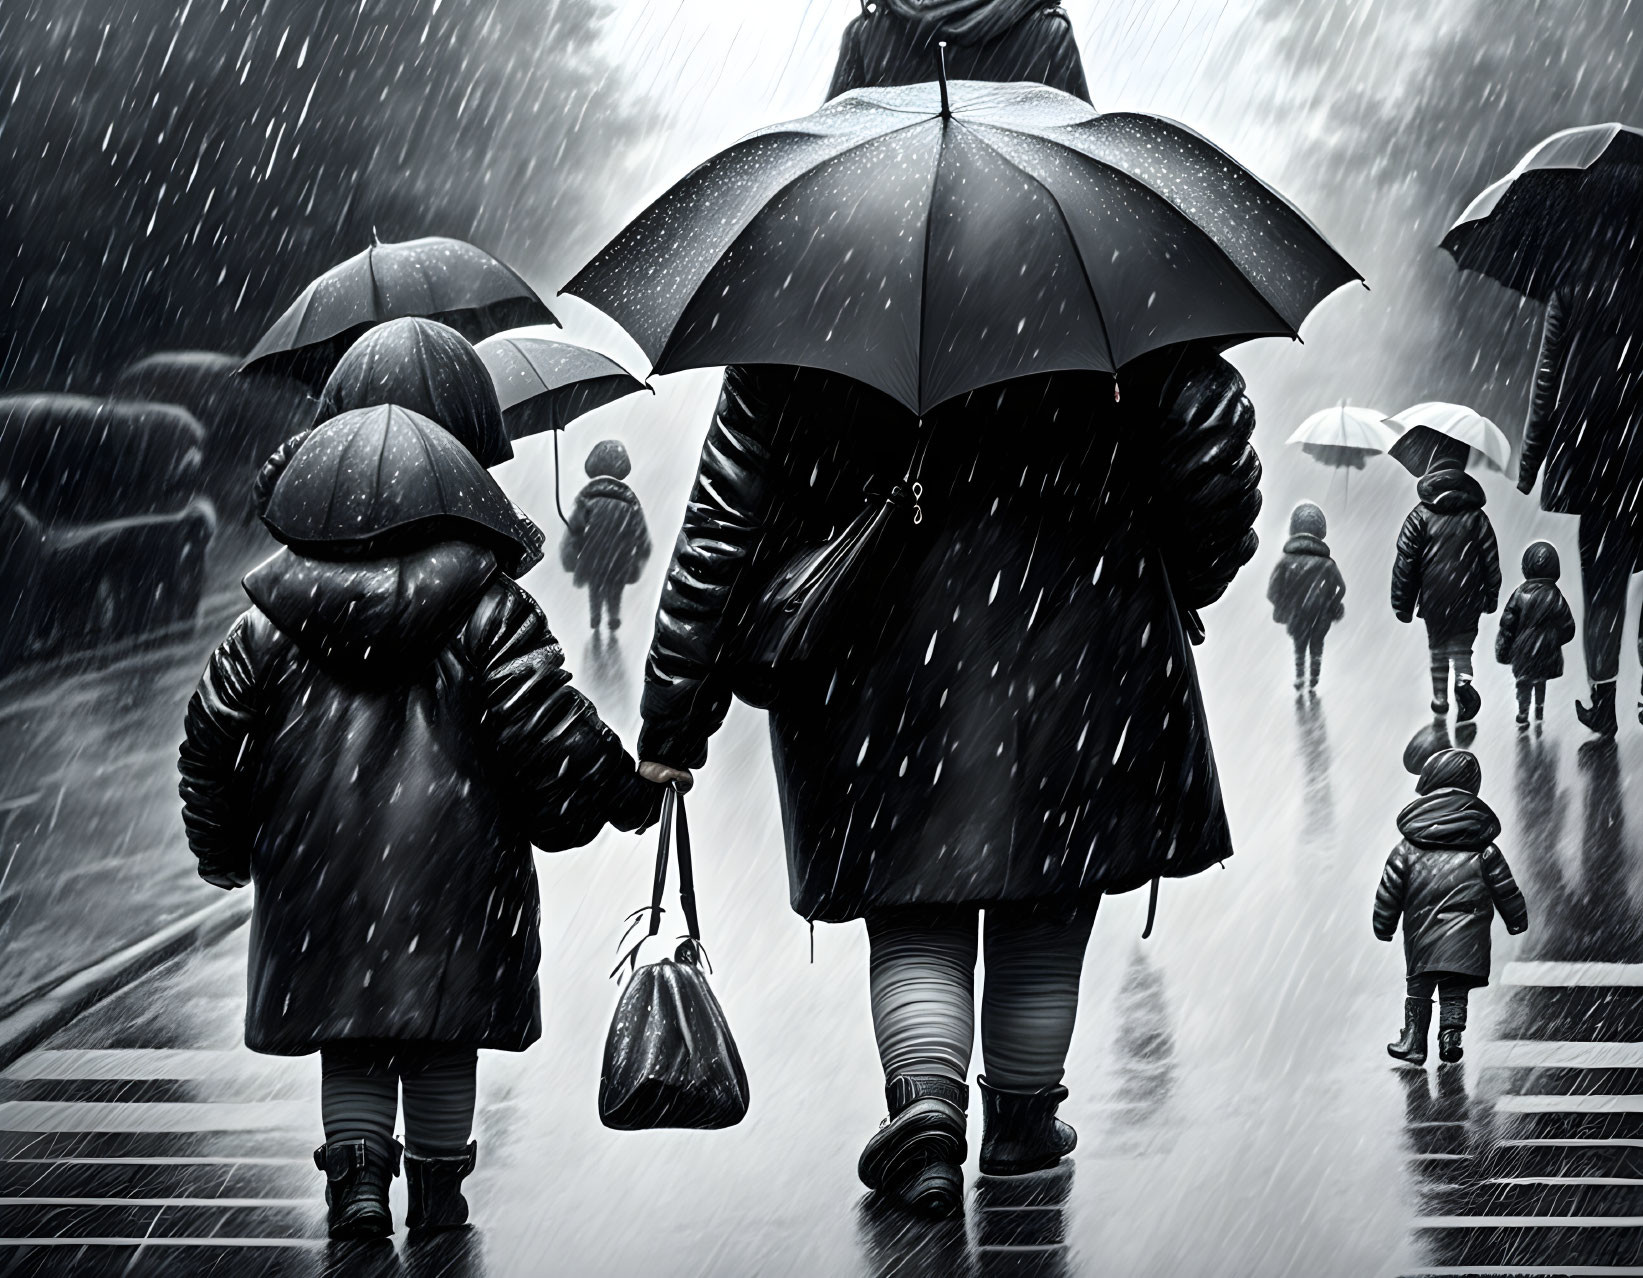 Mother and child looking through the rain